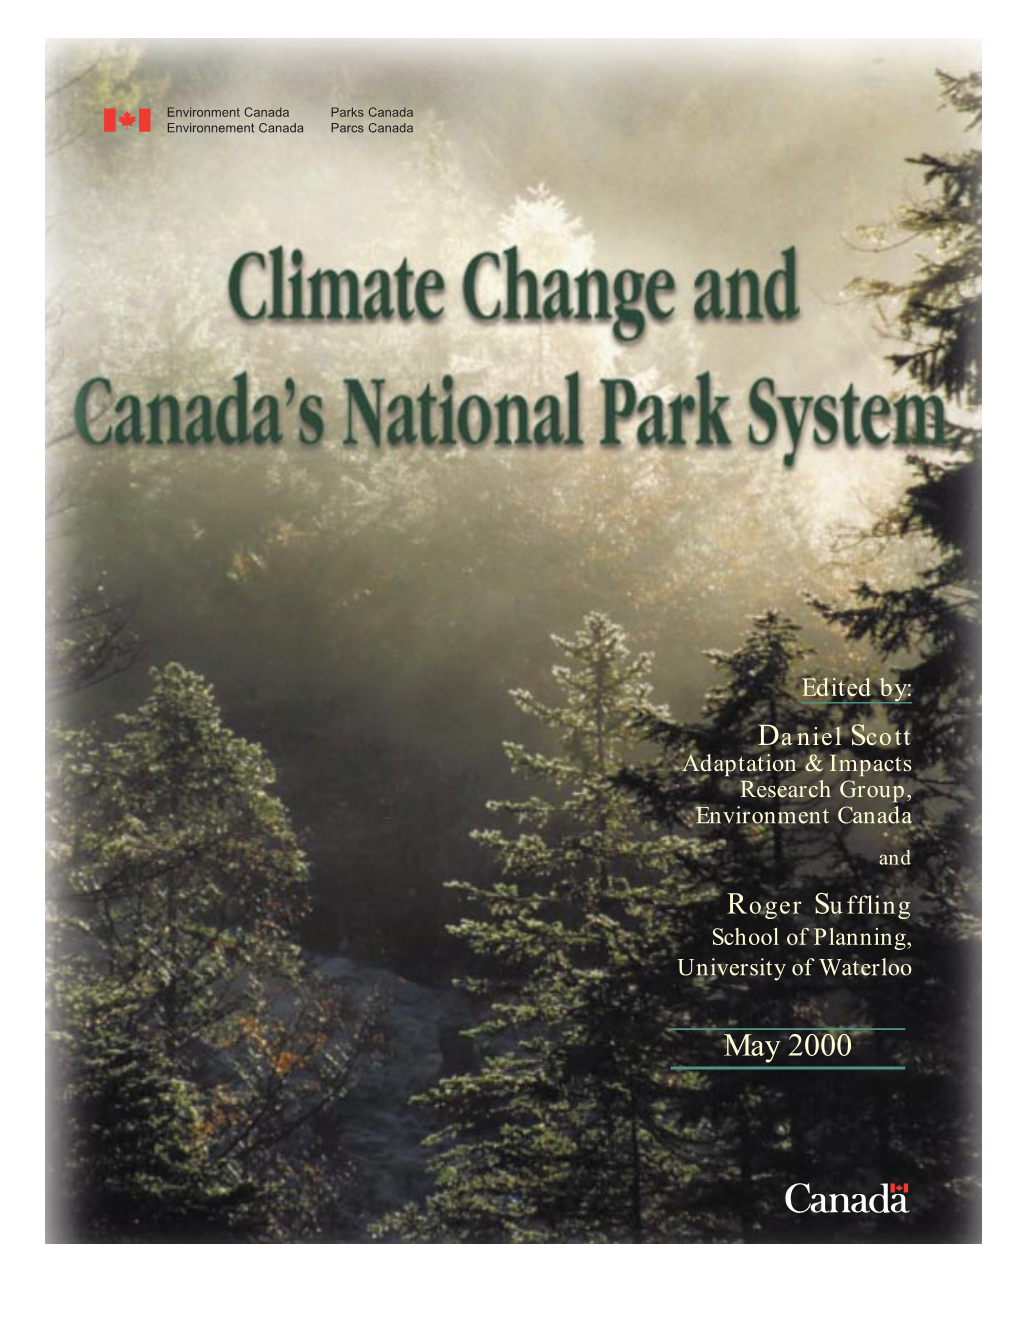 National Park System: a Screening Level Assessment